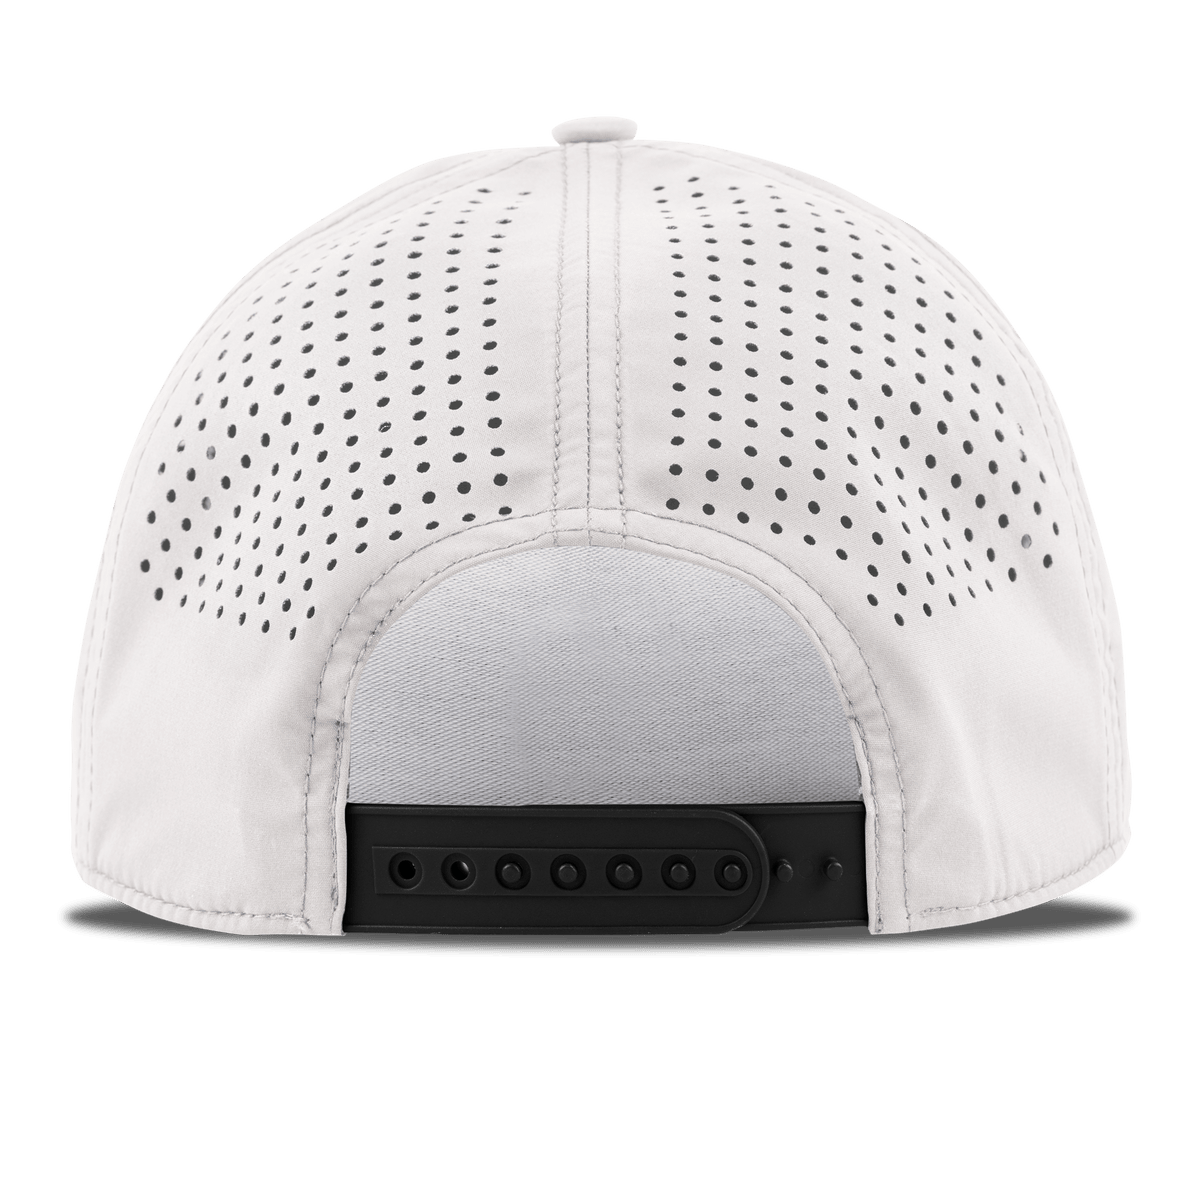 Old Glory PVC Curved 5 Panel Performance Back White/Black